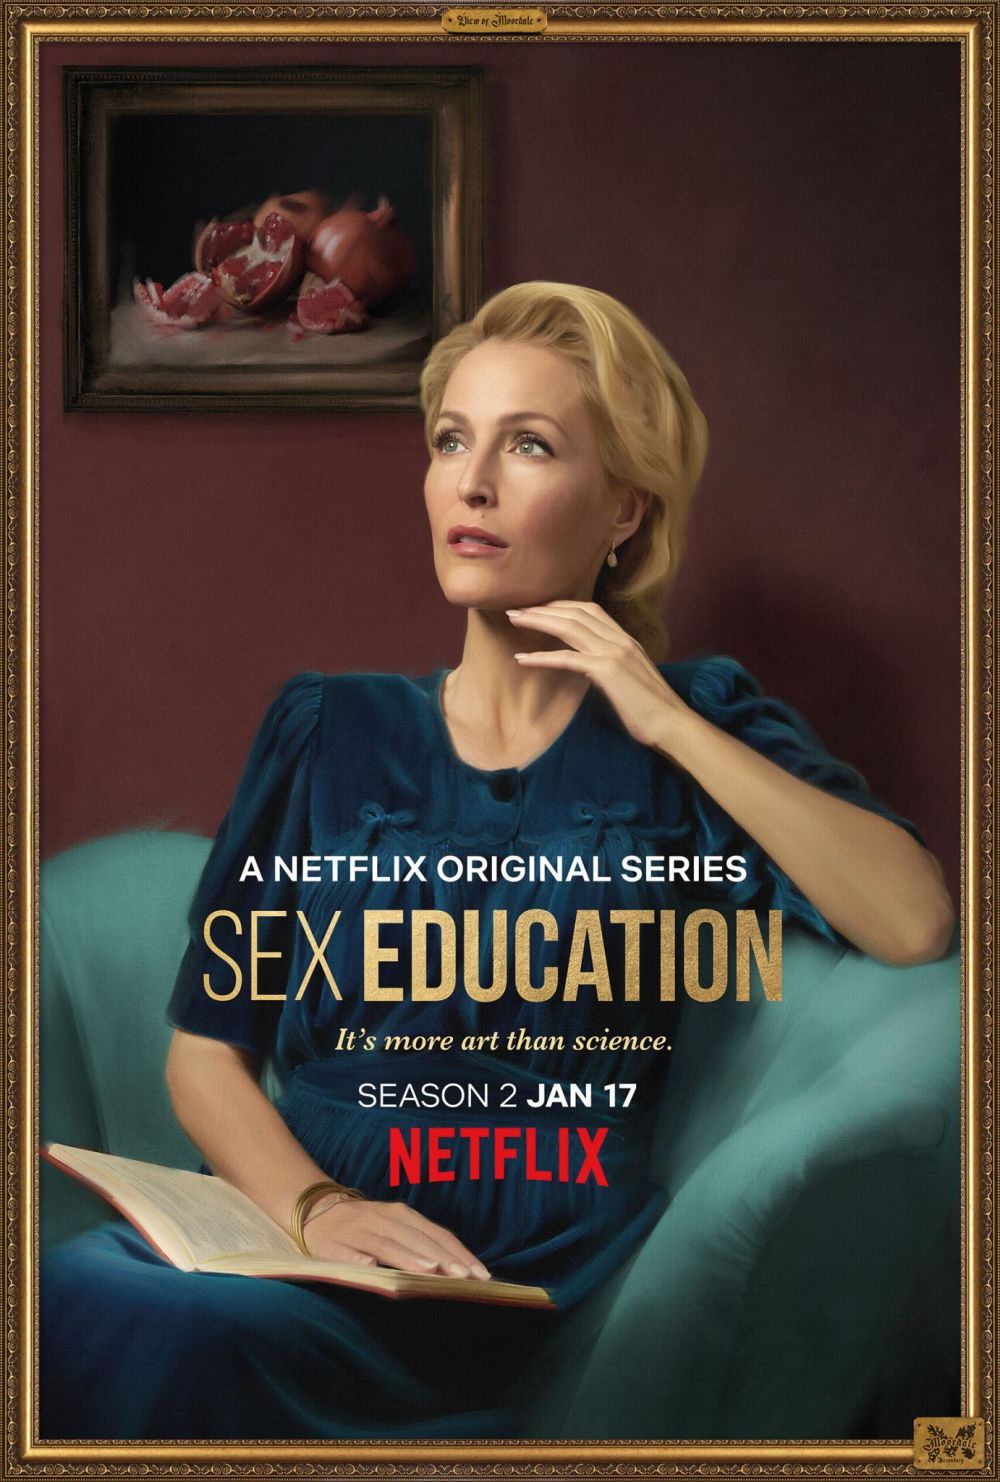 A promotional portrait of Jean from the Netflix series, Sex Education, played by Gillian Anderson.